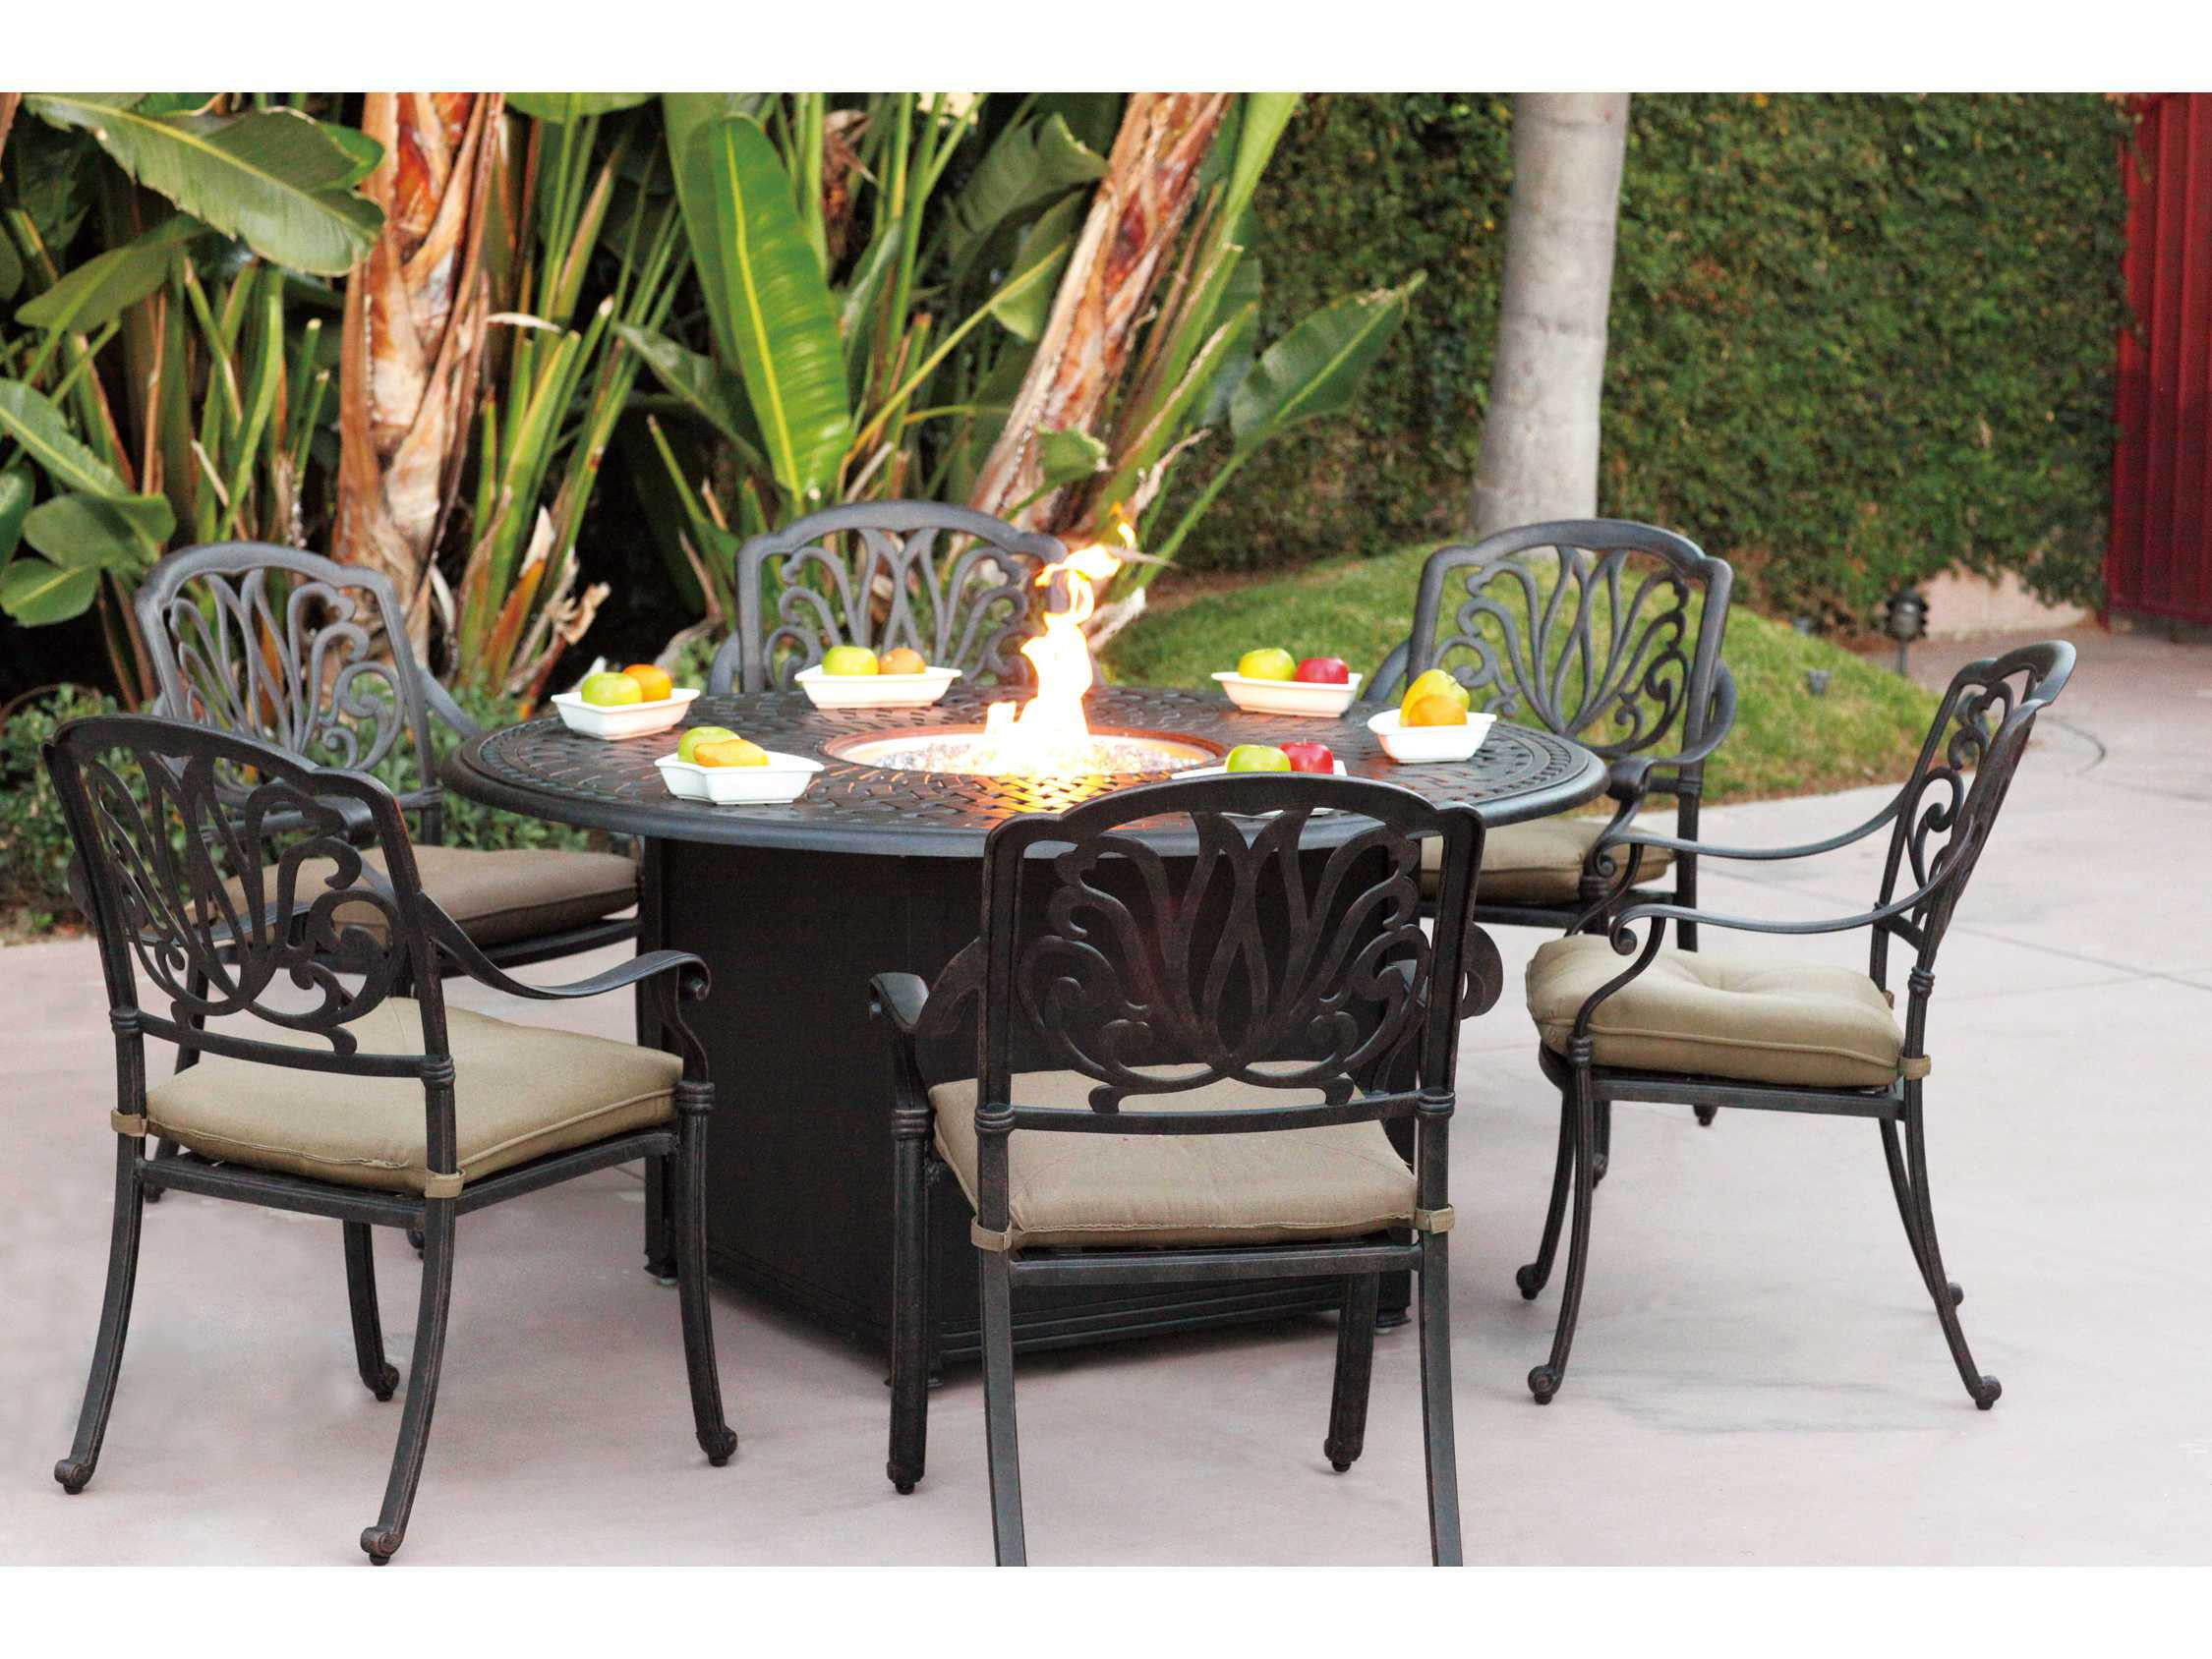 Wendall Outdoor Fire Pit Dining Table Woodard hammered 48 in. round fire pit table